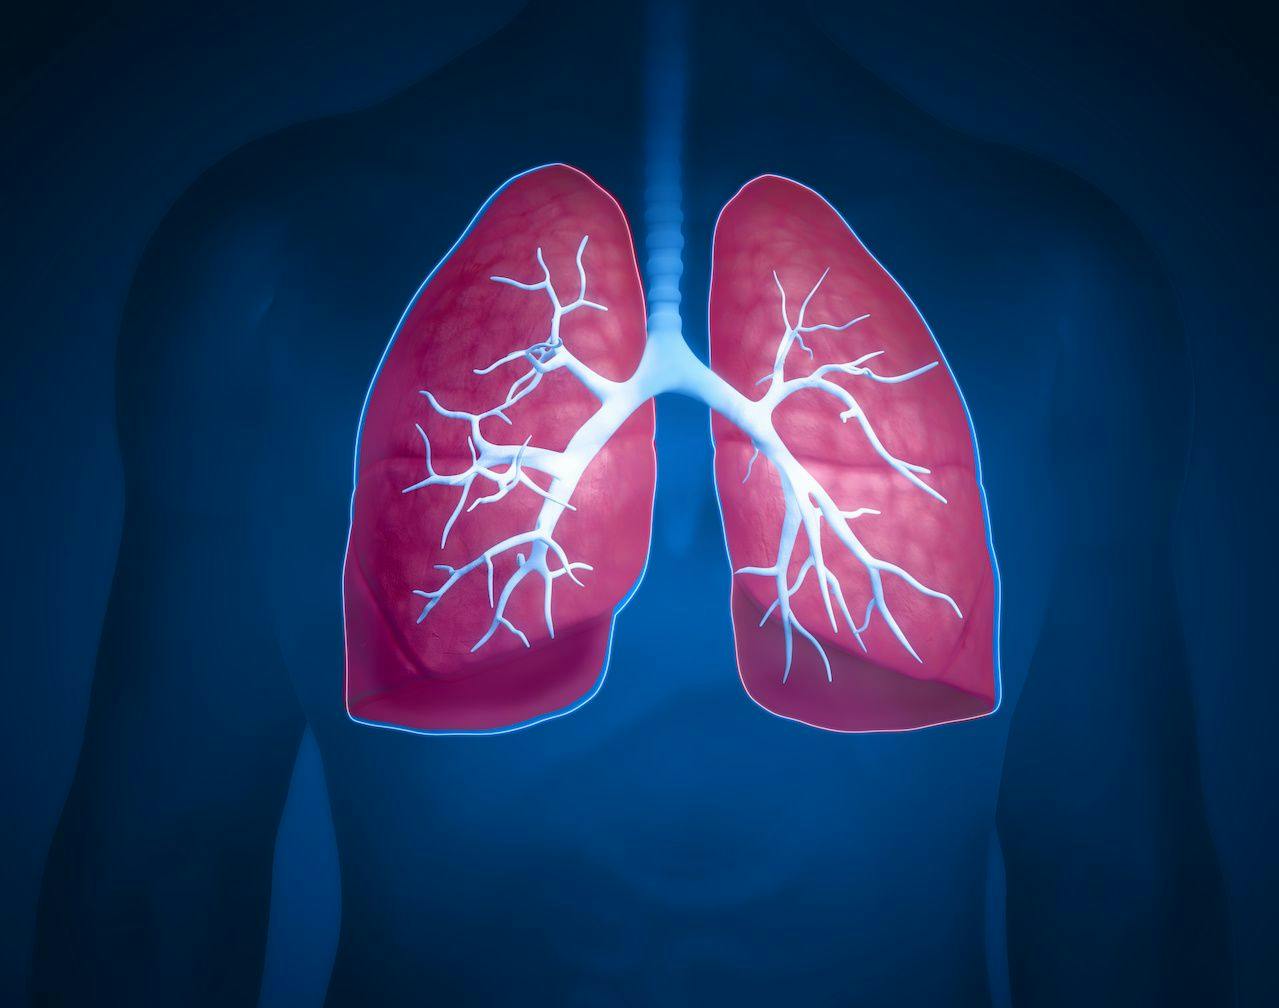 COPD Is a More Likely Comorbid Condition in HIV-Positive Individuals